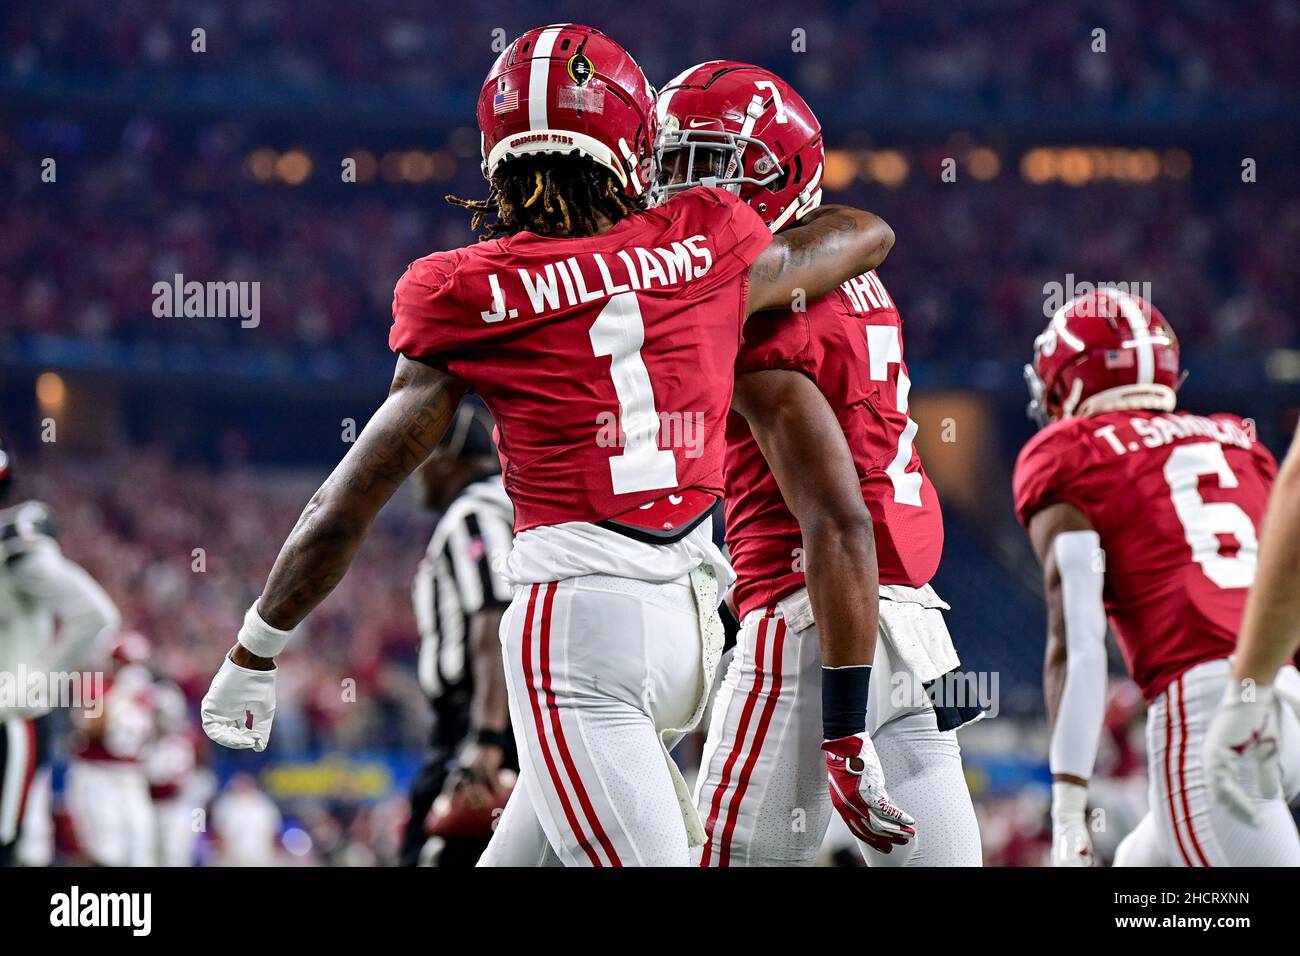 Alabama Crimson Tide wide receiver Ja'Corey Brooks catches a pass for a touchdown as he celebrates with Alabama Crimson Tide wide receiver Jameson Williams (1) during a game between the Cincinnati Bearcats and Alabama Crimson Tide of the 2021 College Football Playoff Semifinal at the 86th Goodyear Cotton Bowl Classic game at AT&T Stadium in Arlington, Texas, December 31st, 2021.Manny Flores/CSM Stock Photo